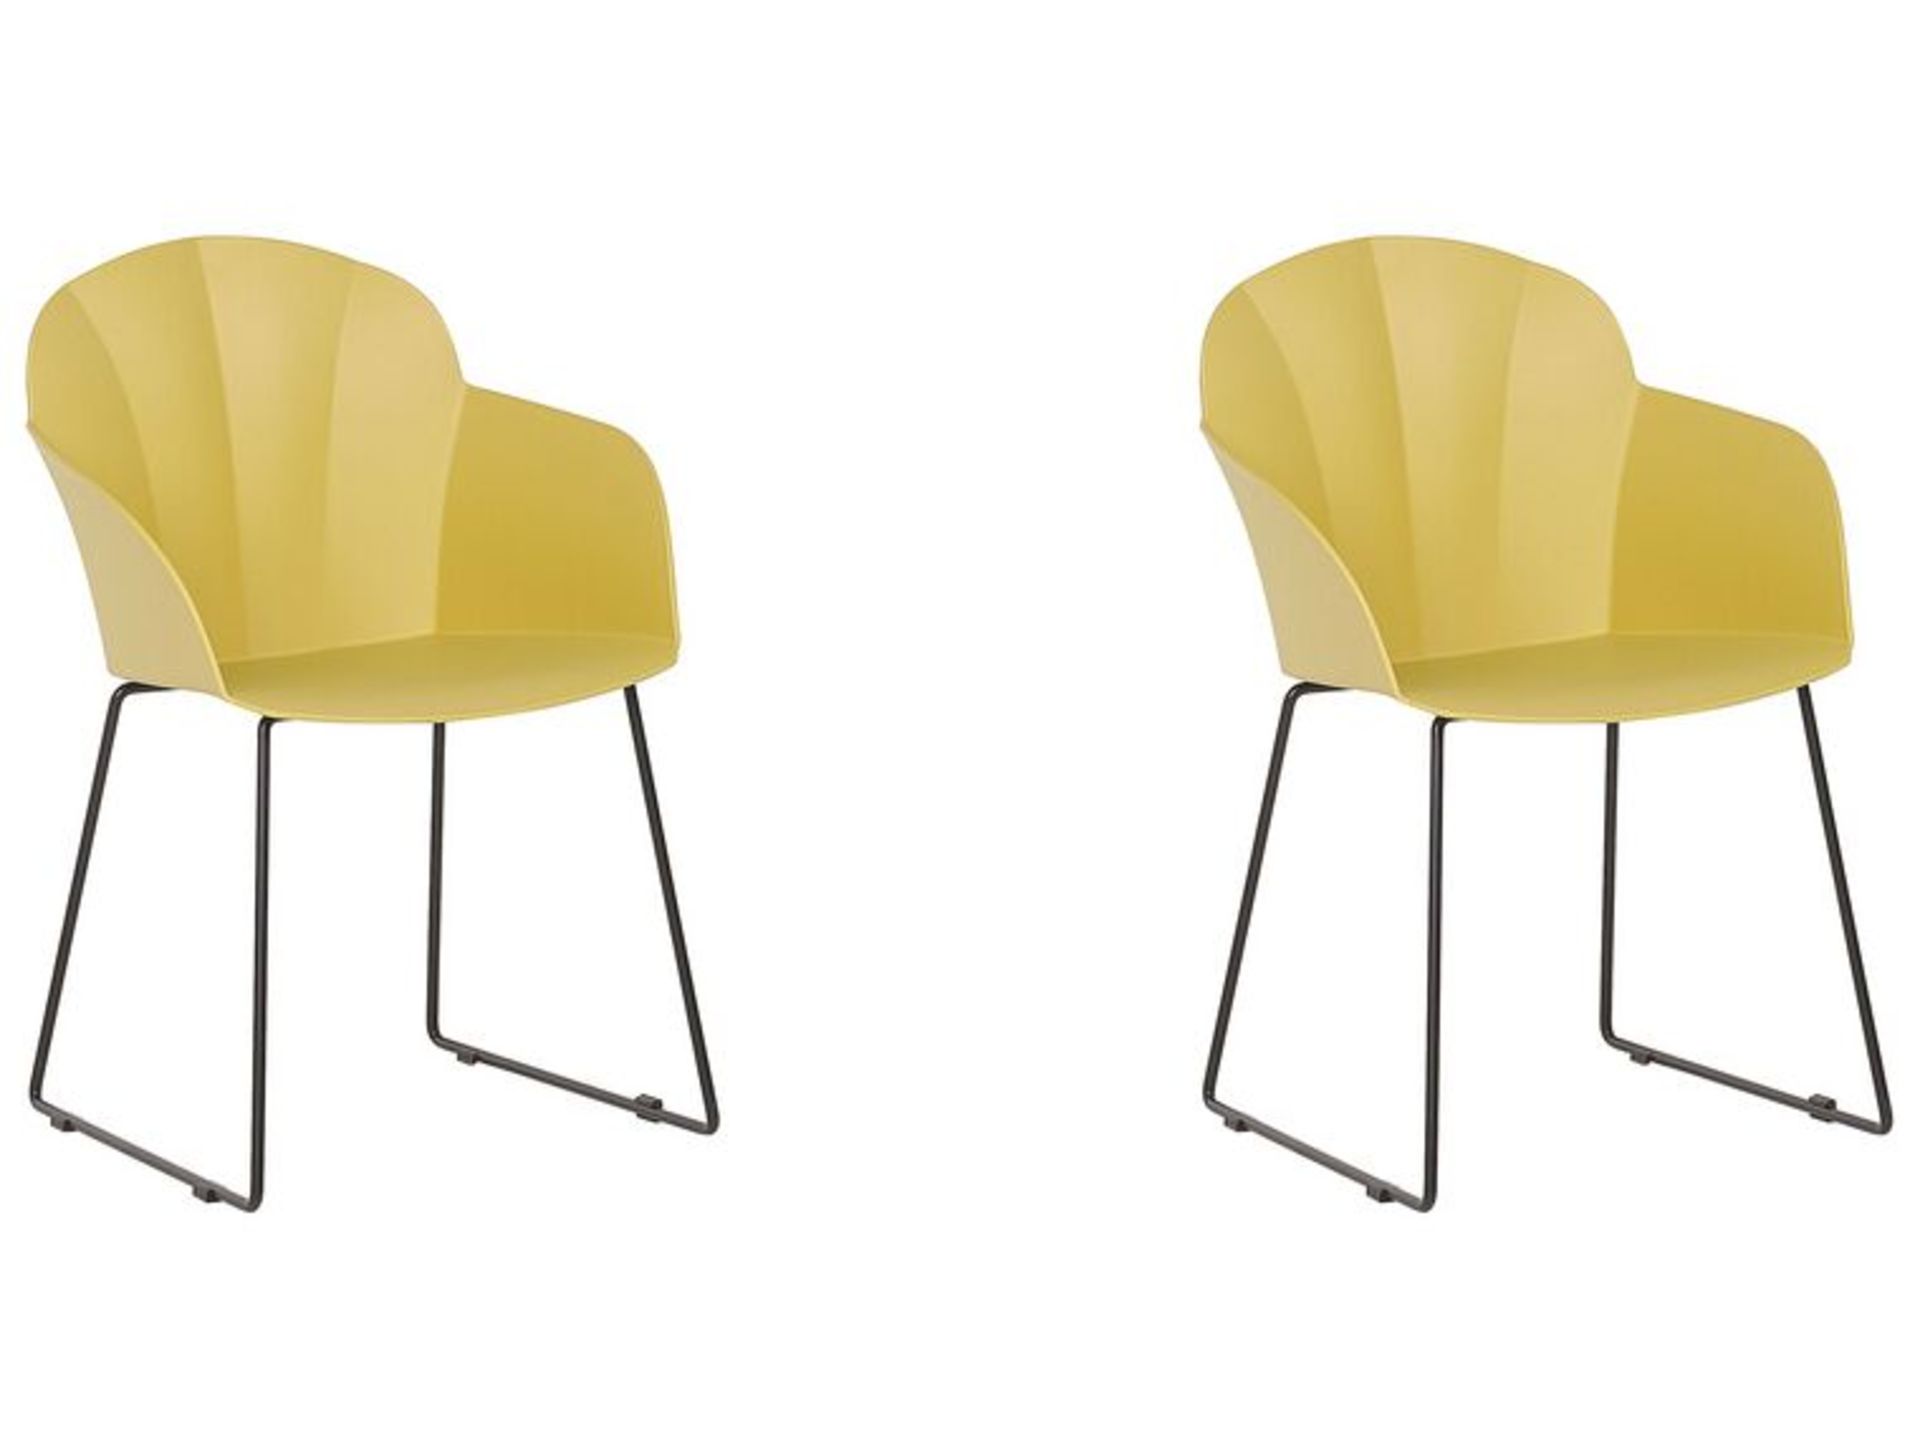 Sylva Set of 2 Dining Chairs Yellow. - SR6. RRP £199.99. Dining chairs should first and foremost